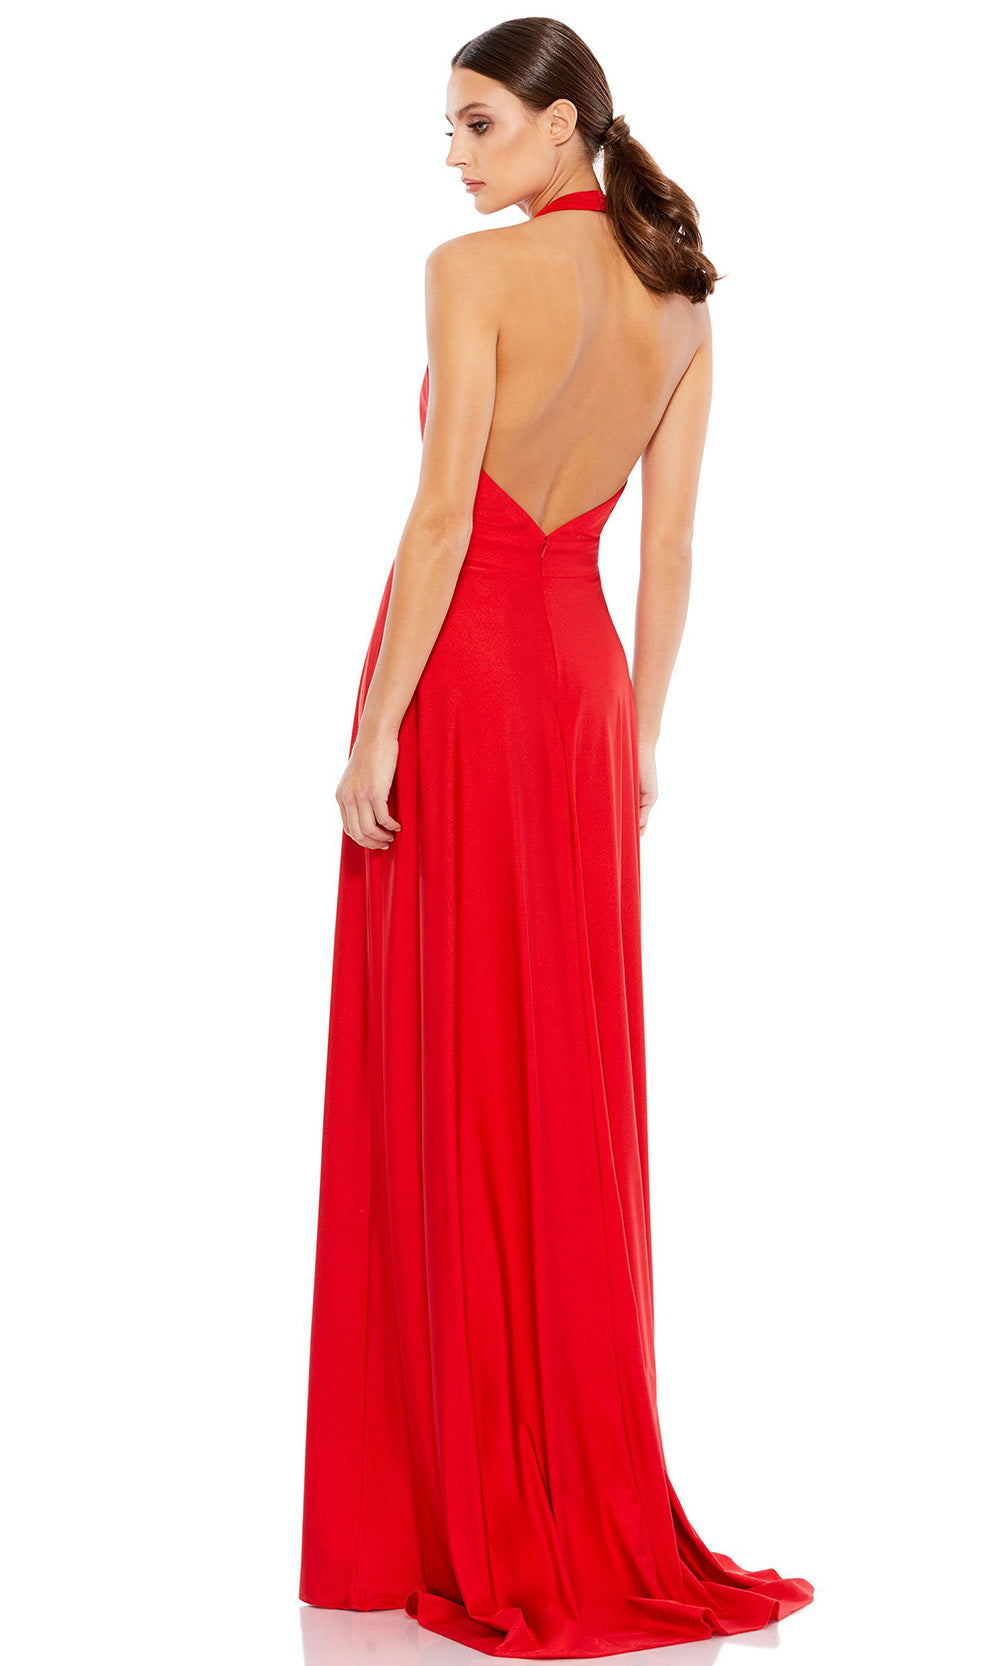 Ieena Duggal - 26539I Plunging Halter V-Neck A-Line Gown In Red